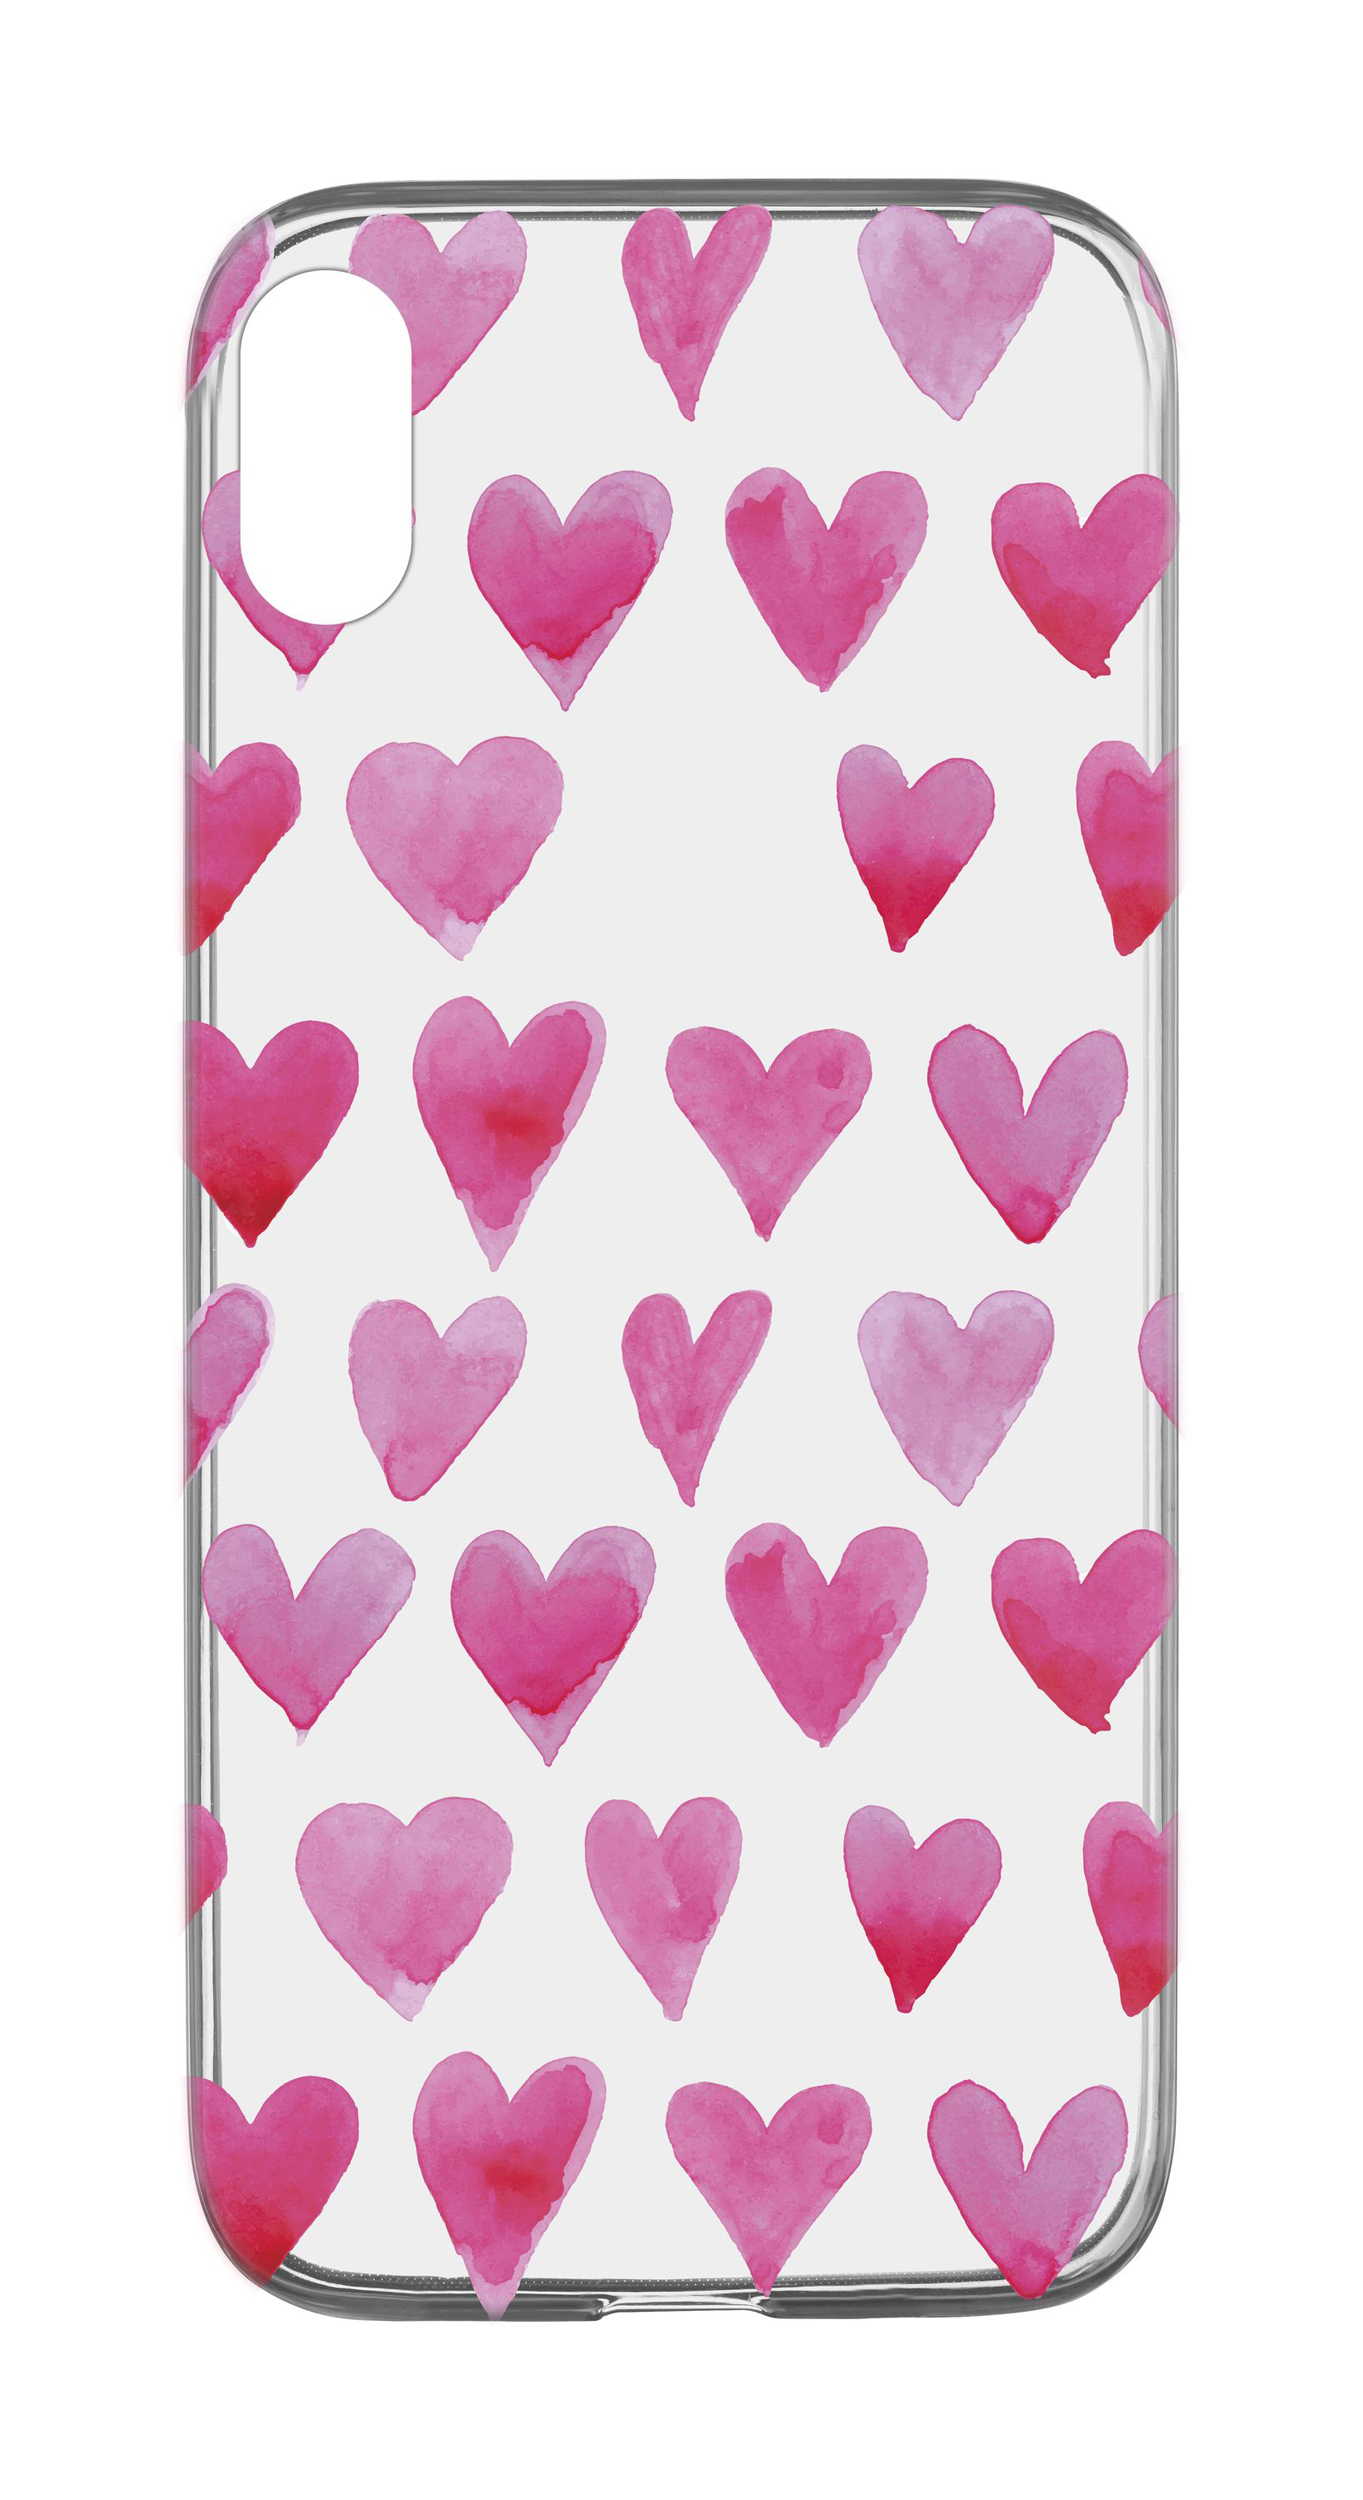 iPhone X/XS, case style, watercolor heart